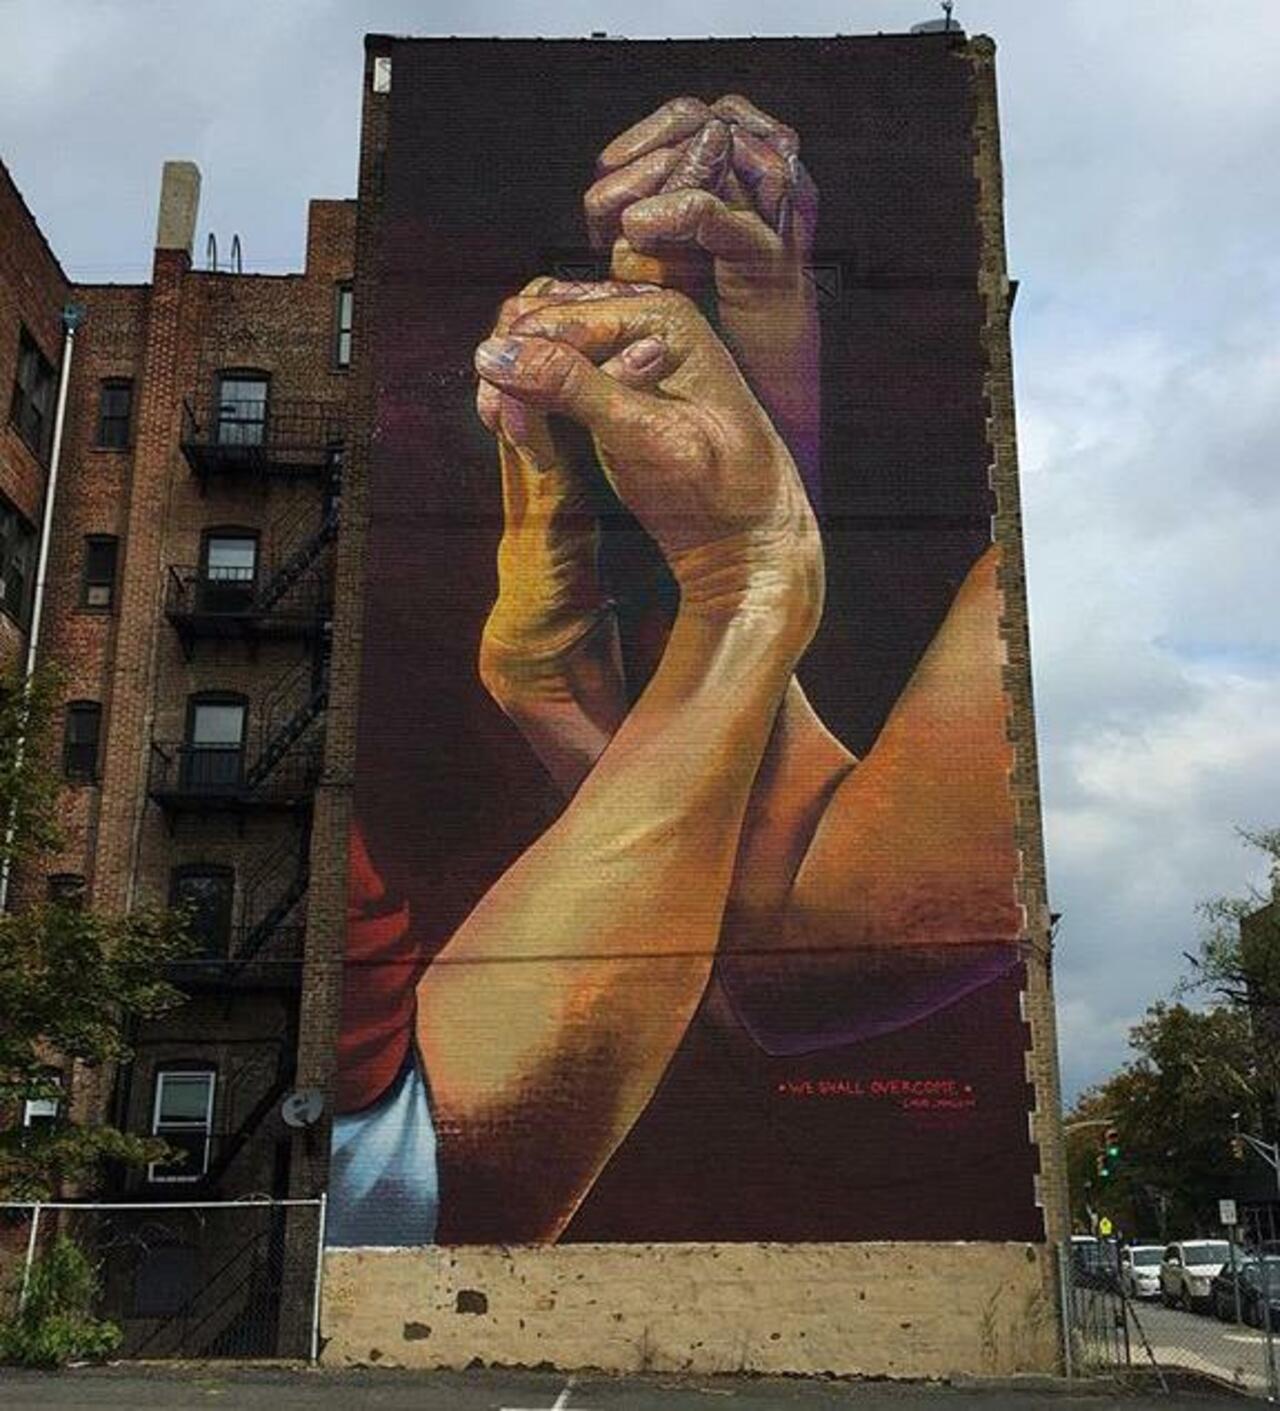 New Street Art by CaseMaclaim in Jersey City for the TheBKcollective 

#art #graffiti #mural #streetart http://t.co/C7BcZG4xtf